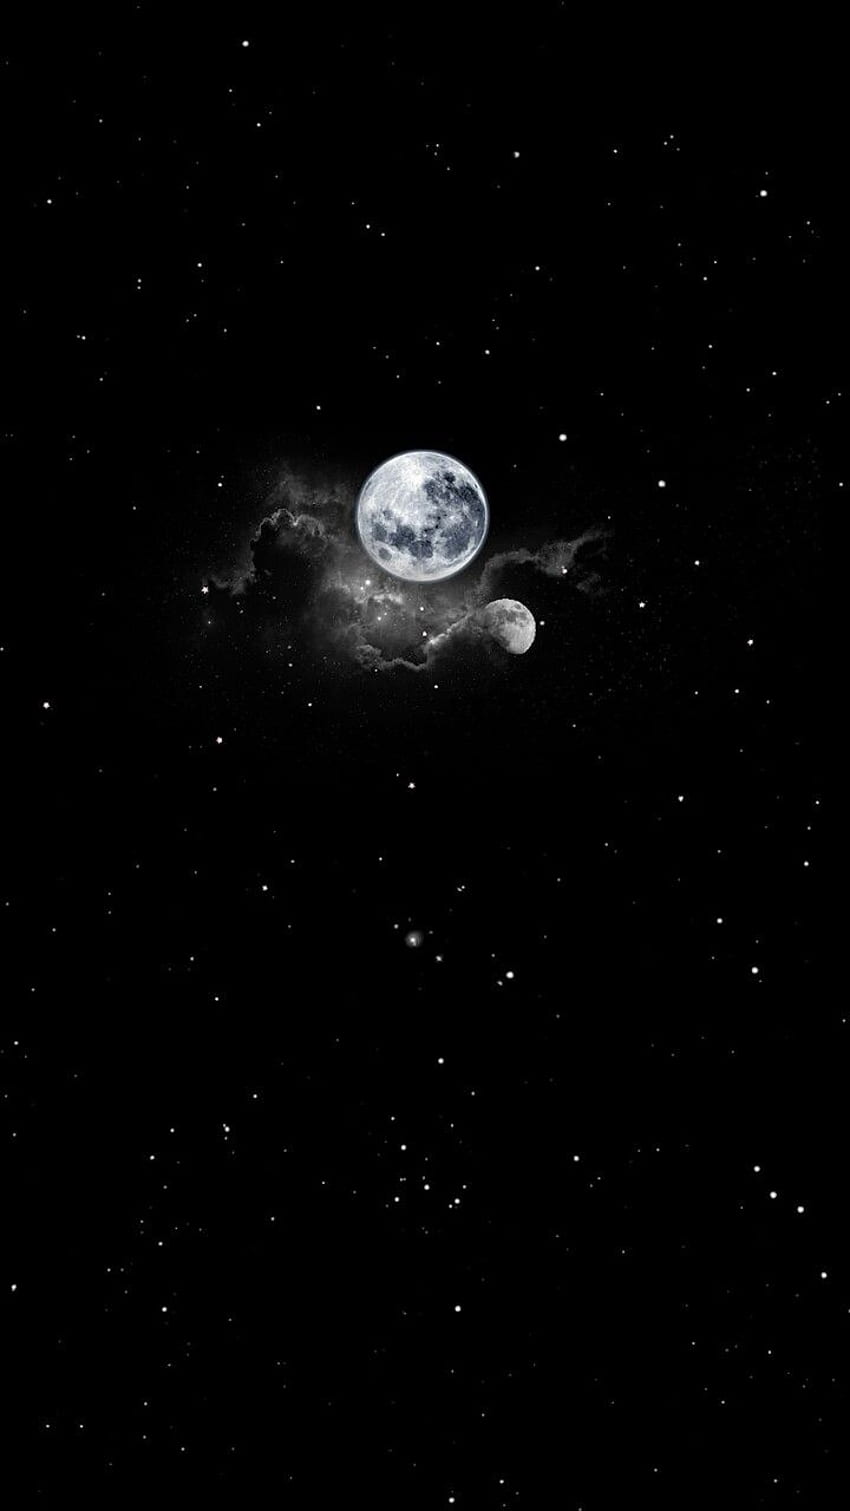 A black and white photo of the moon - Moon, Star Trek, space, Earth